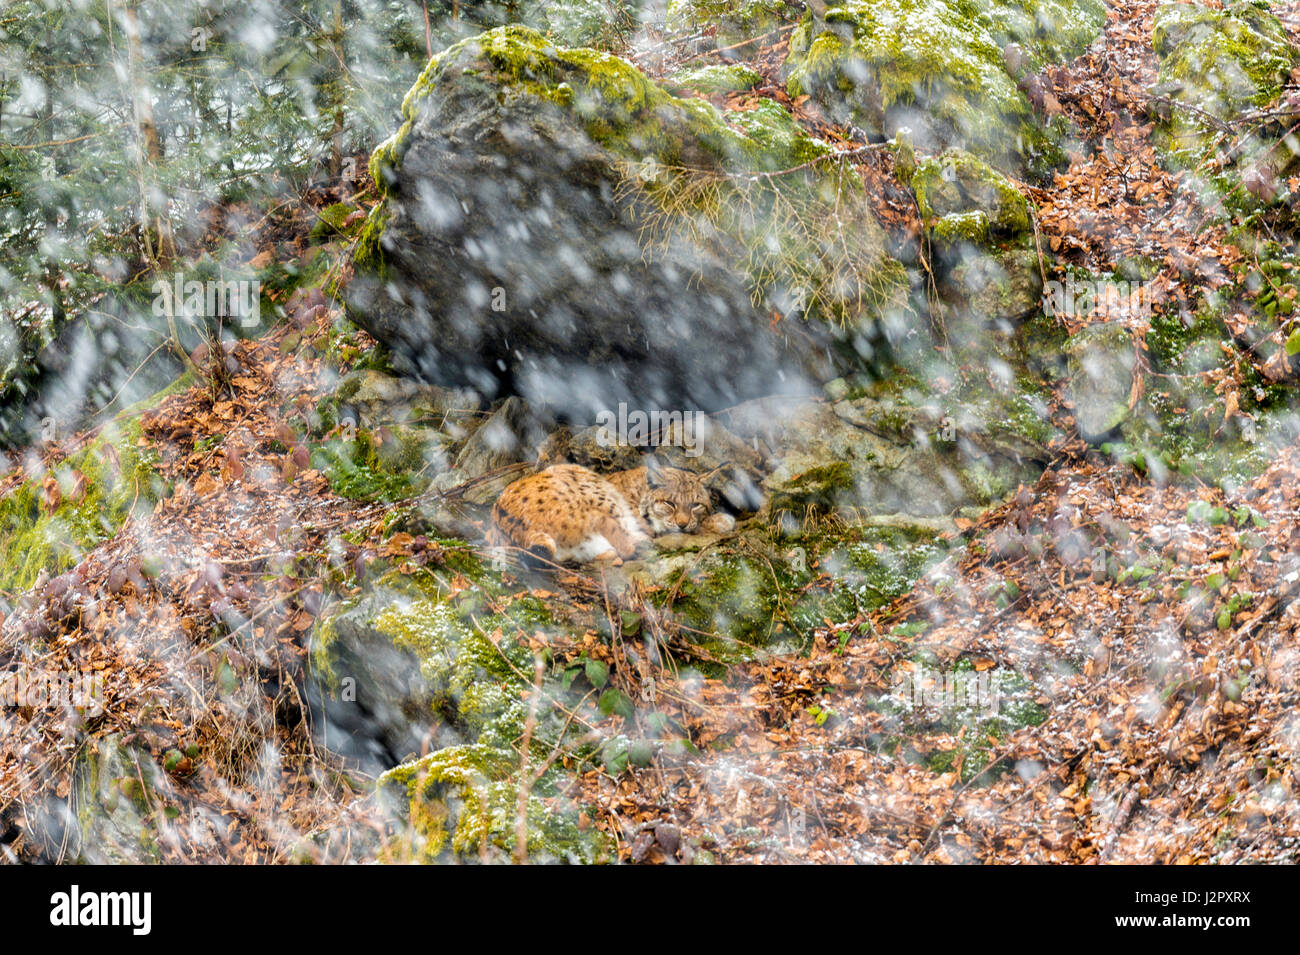 Beautiful Eurasian Lynx (Lynx lynx) depicted taking cover from a snow storm under a rocky outcrop in a remote woodland winter setting. Stock Photo